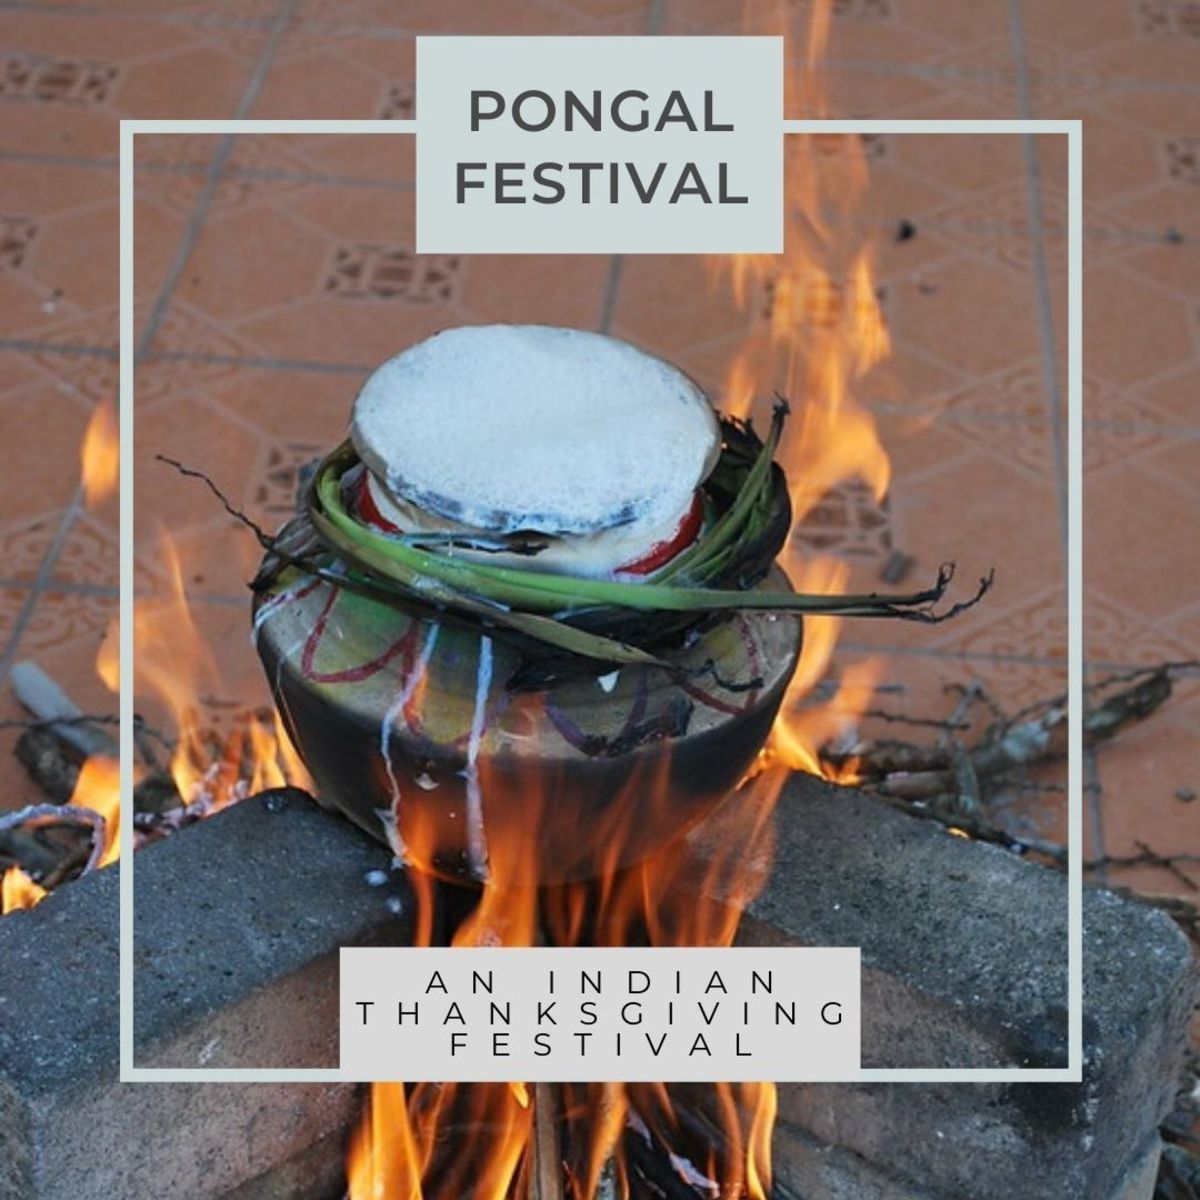 Pongal literally means "boiling over" and is celebrated by Tamils all over the world as a thanksgiving for a good harvest.